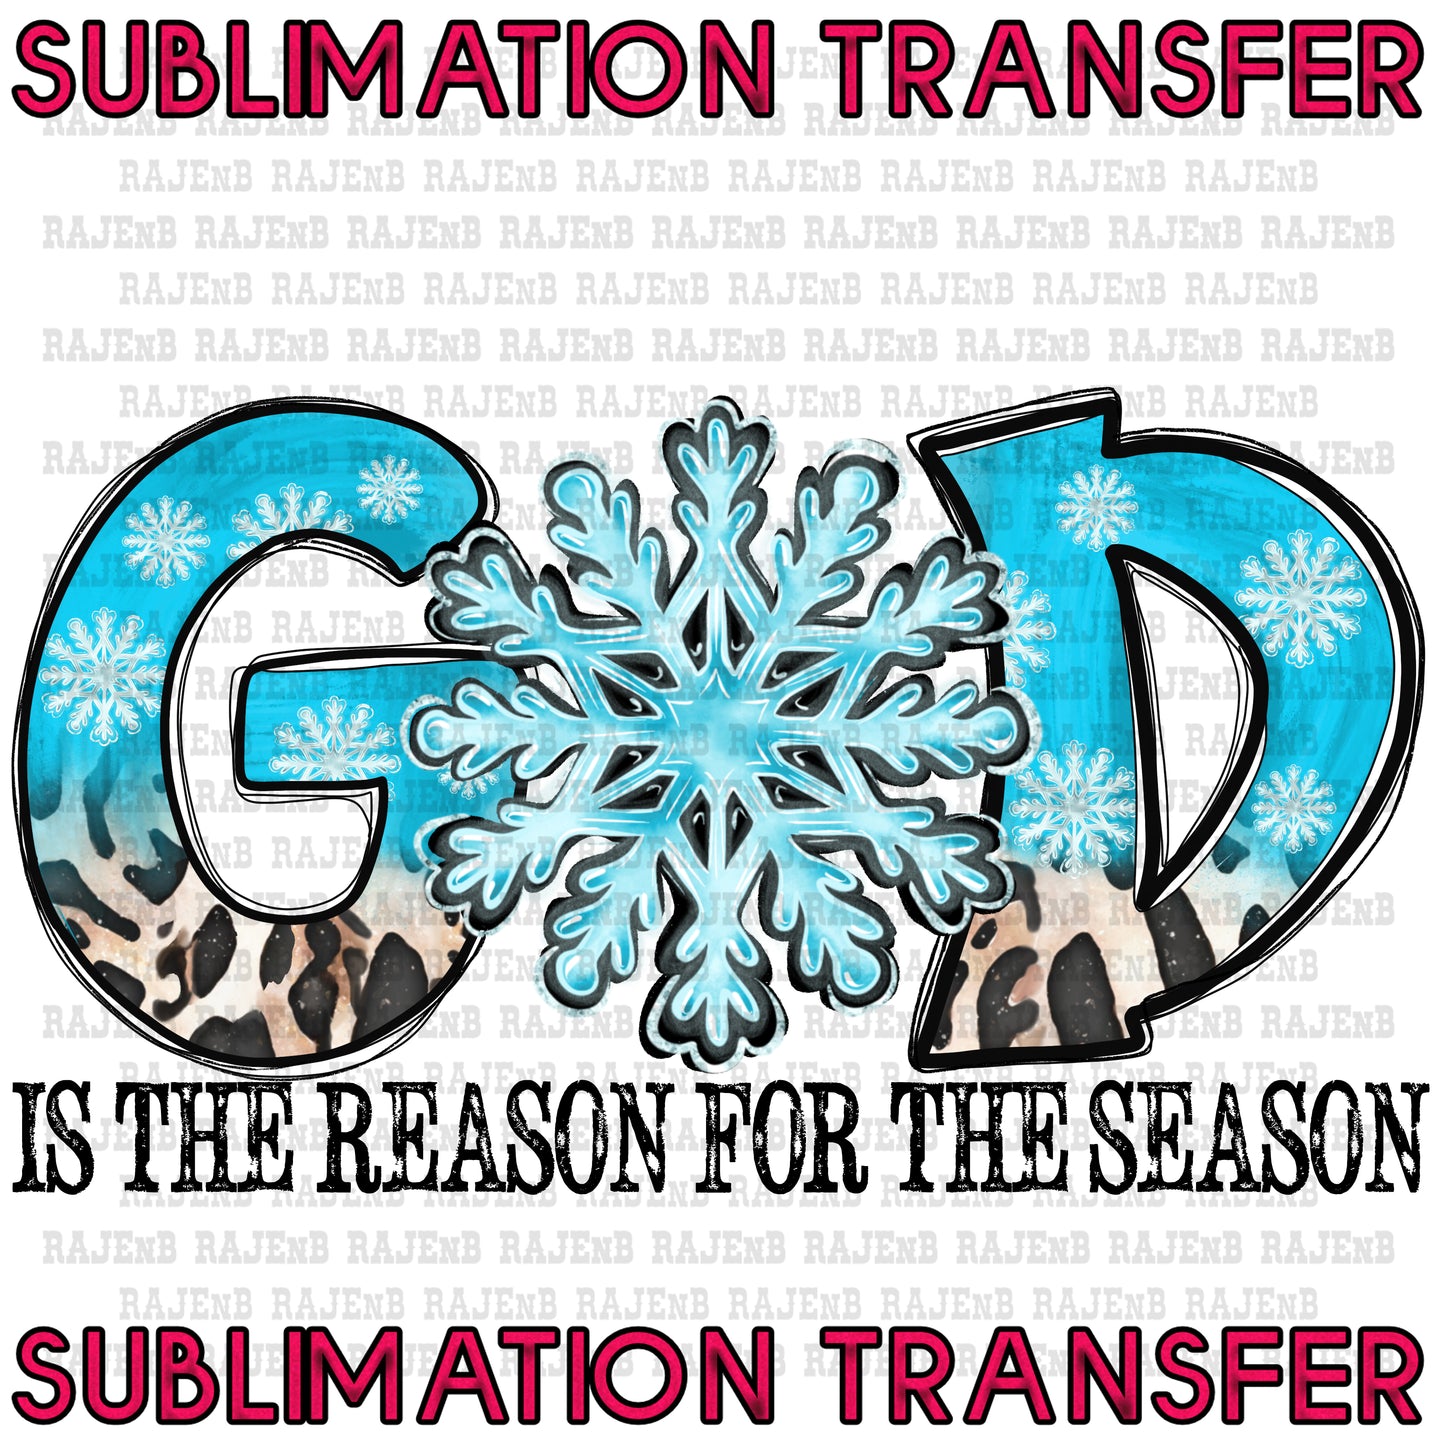 God is the Reason - SUBLIMATION TRANSFER 4126SUB